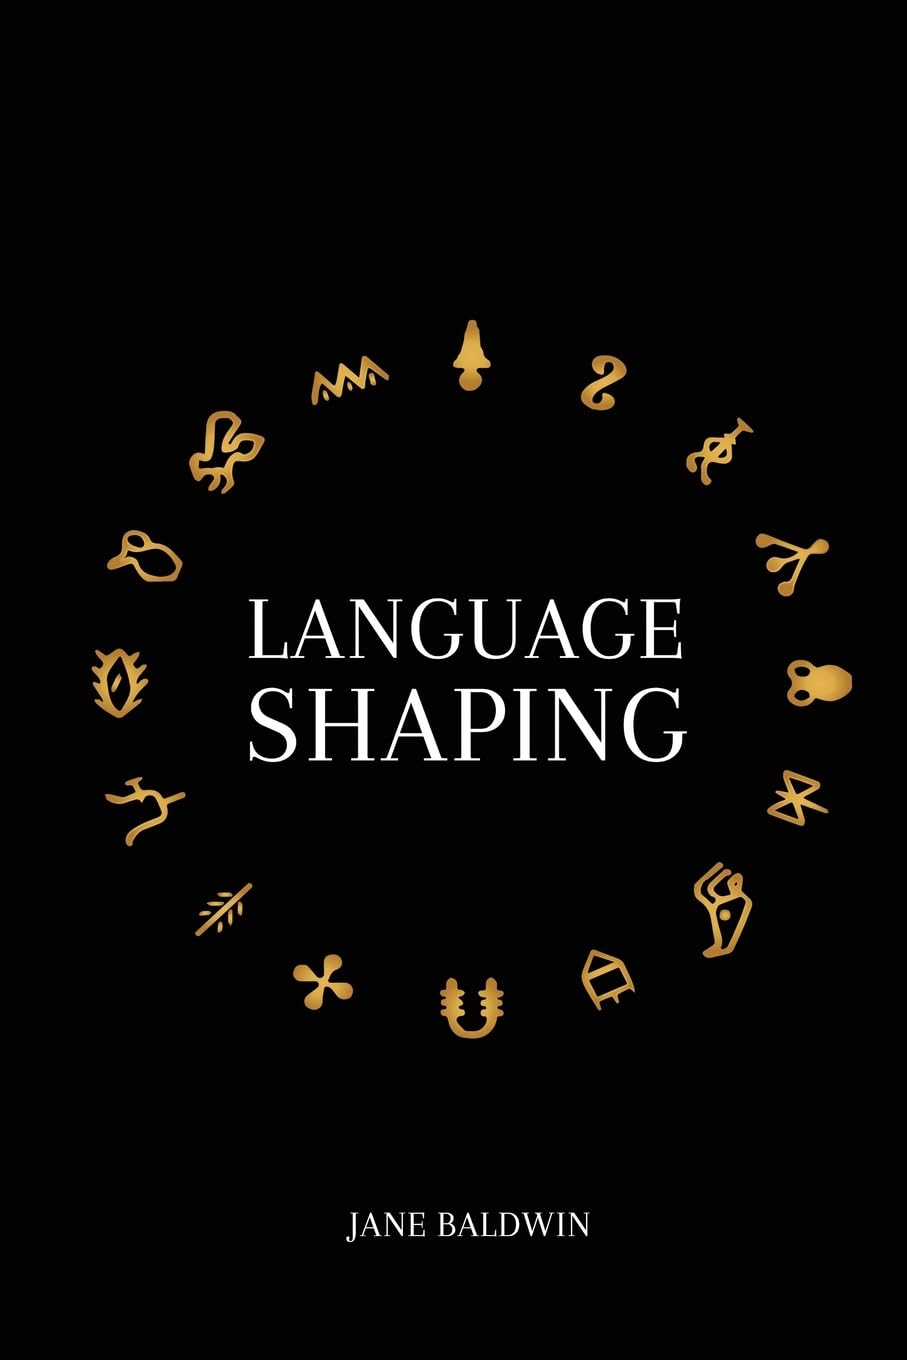 Embark on an Epic Journey of Discovery with "Language Shaping" by Jane Baldwin: A Thrilling Adventure into Culture, Communication, and Humanity